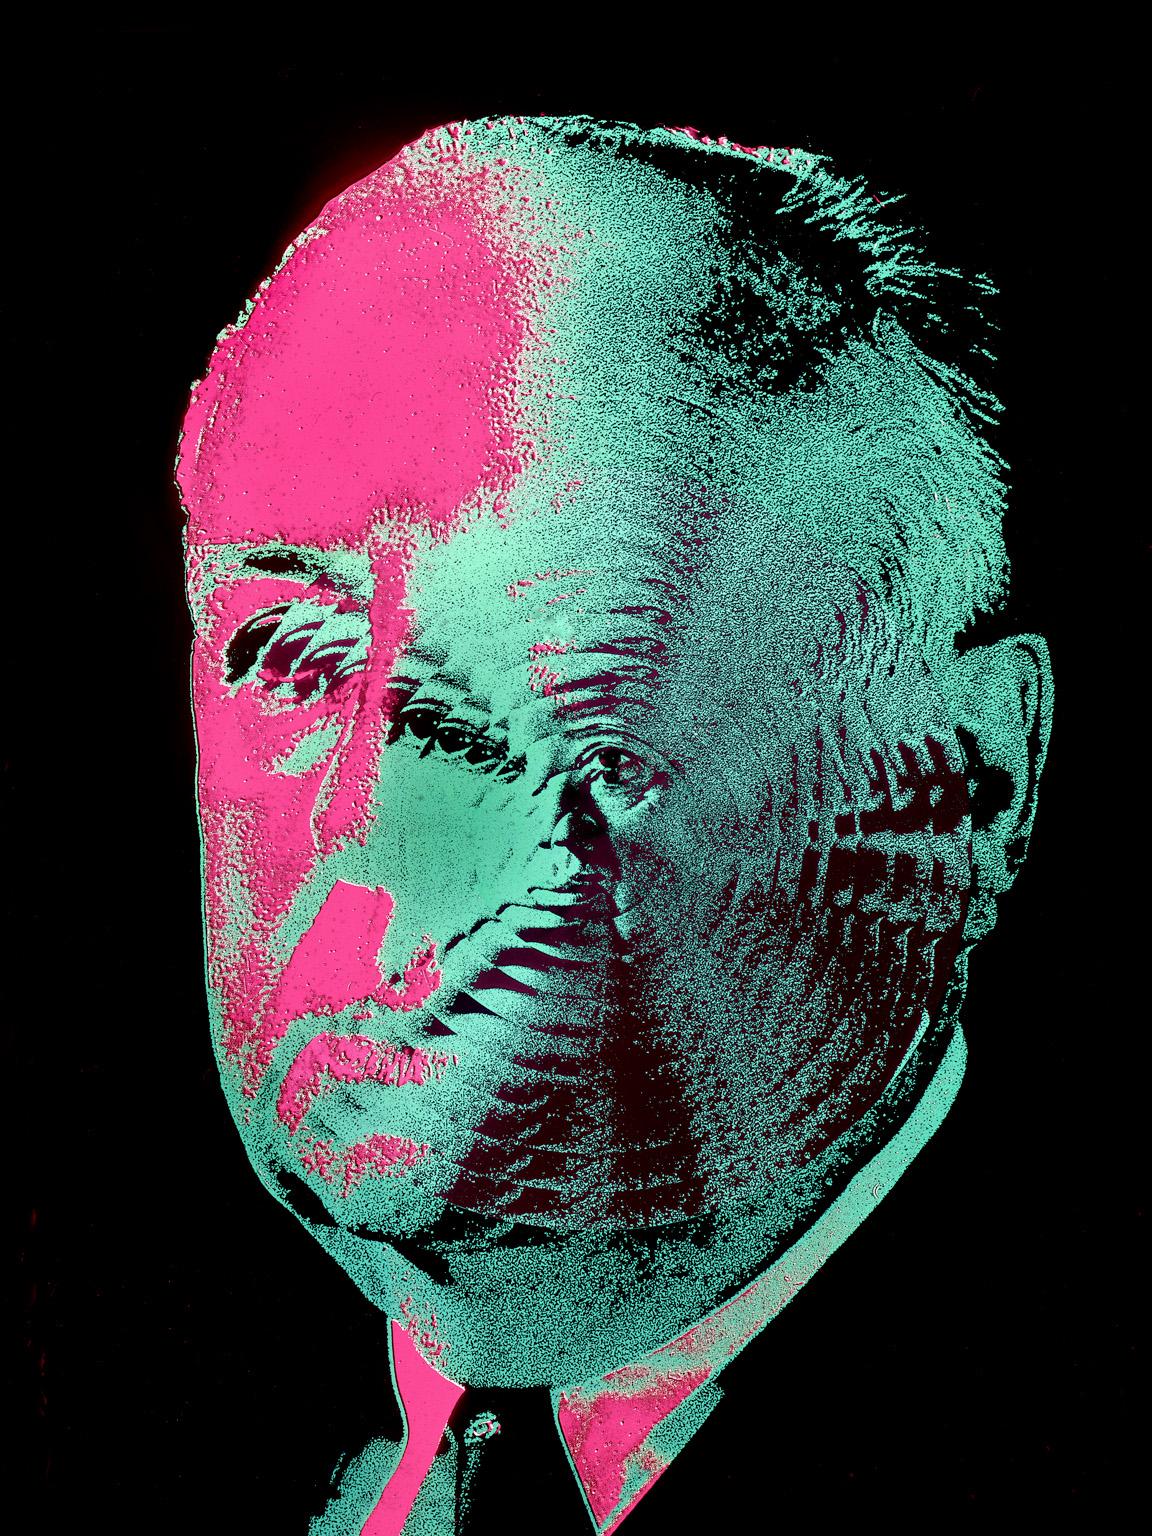 Enzo Ragazzini Figurative Photograph - Alfred Hitchcock - Pop Art, Photograph in Pink and Blue from the 1960s